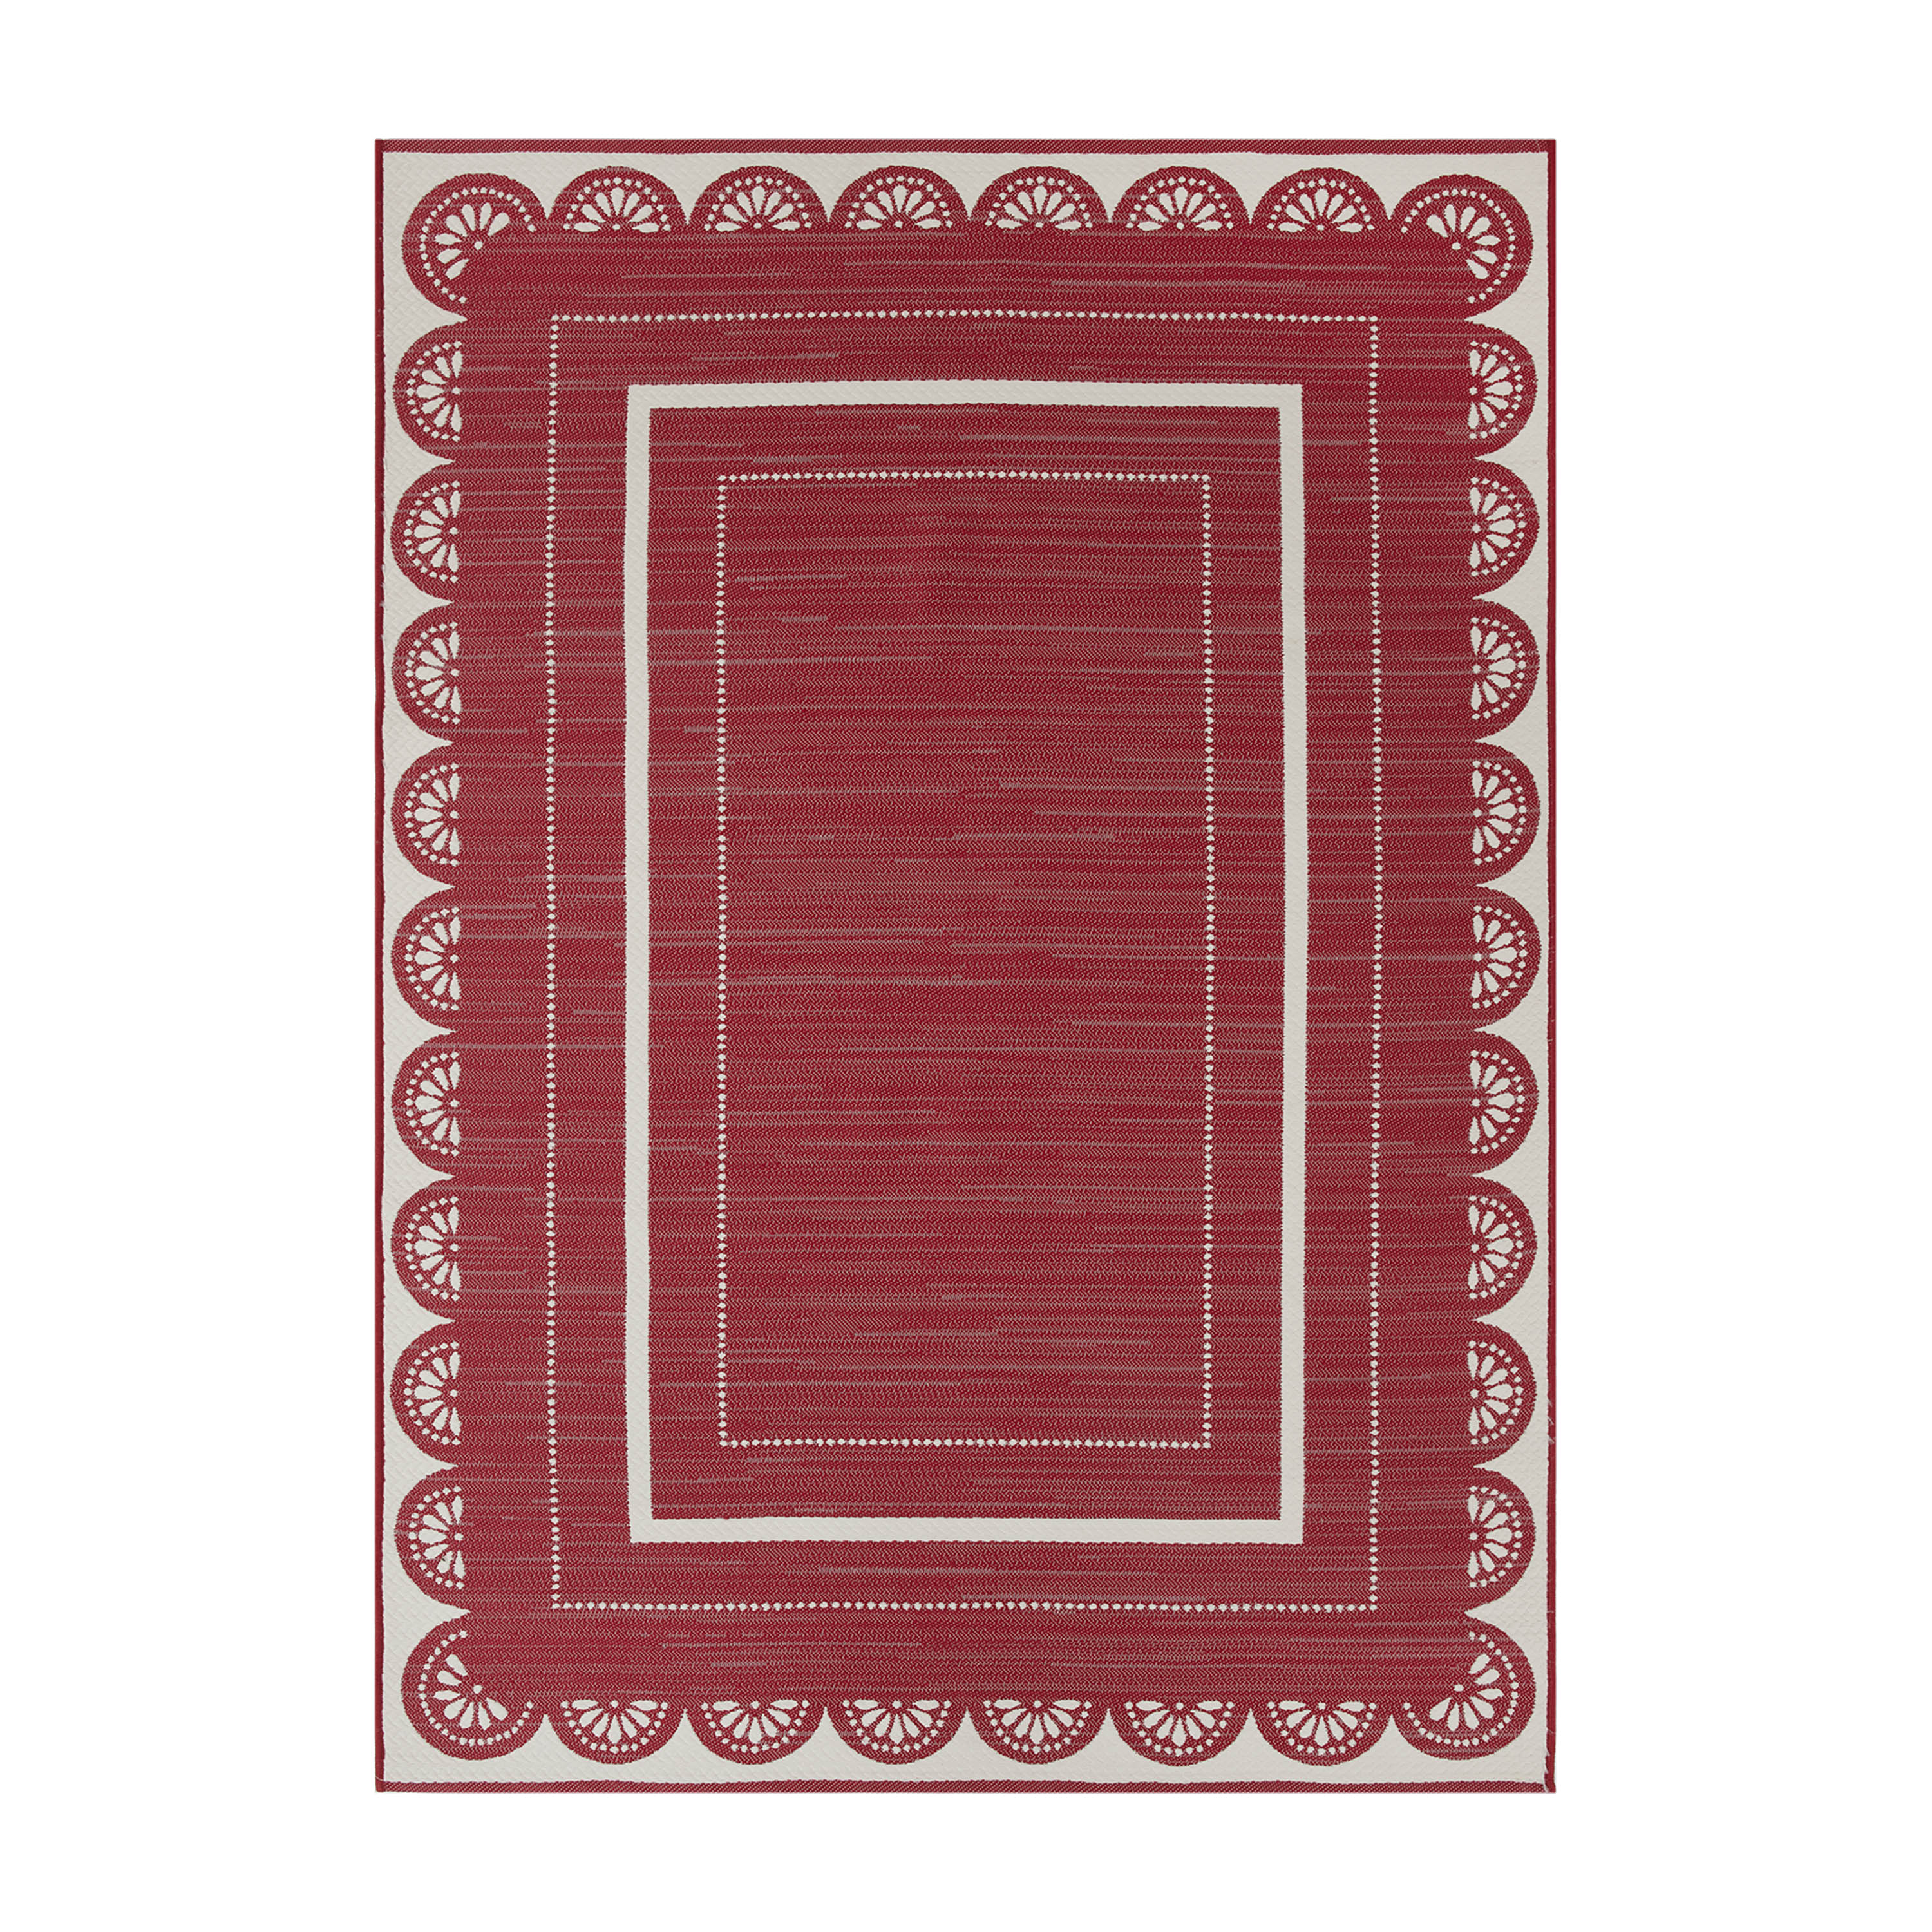 The Pioneer Woman Red Scallop Outdoor Rug, 5' x 7' - image 1 of 5